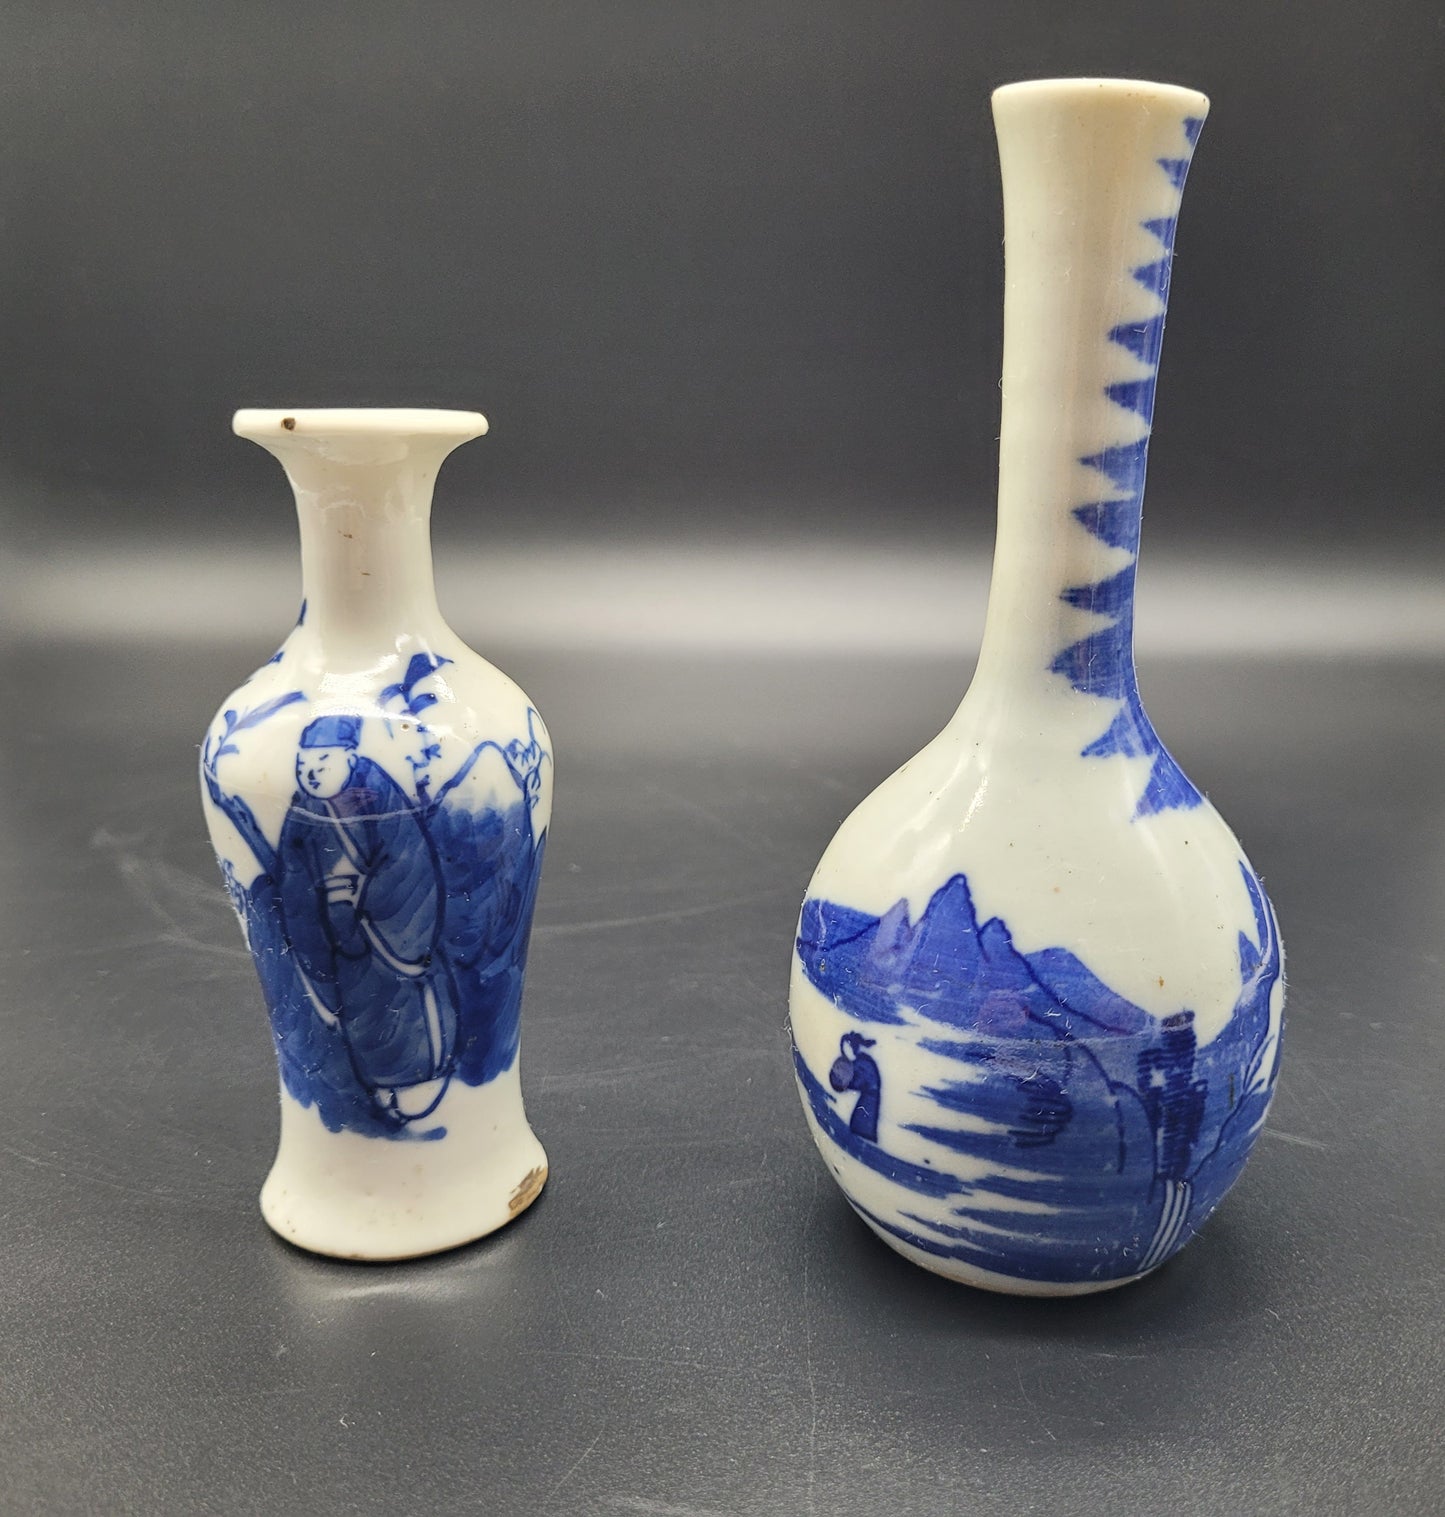 Two really good Chinese Antique Miniature Flower Vases  Dating to the 18th / 19th Century but the smaller vase could possibly be older 